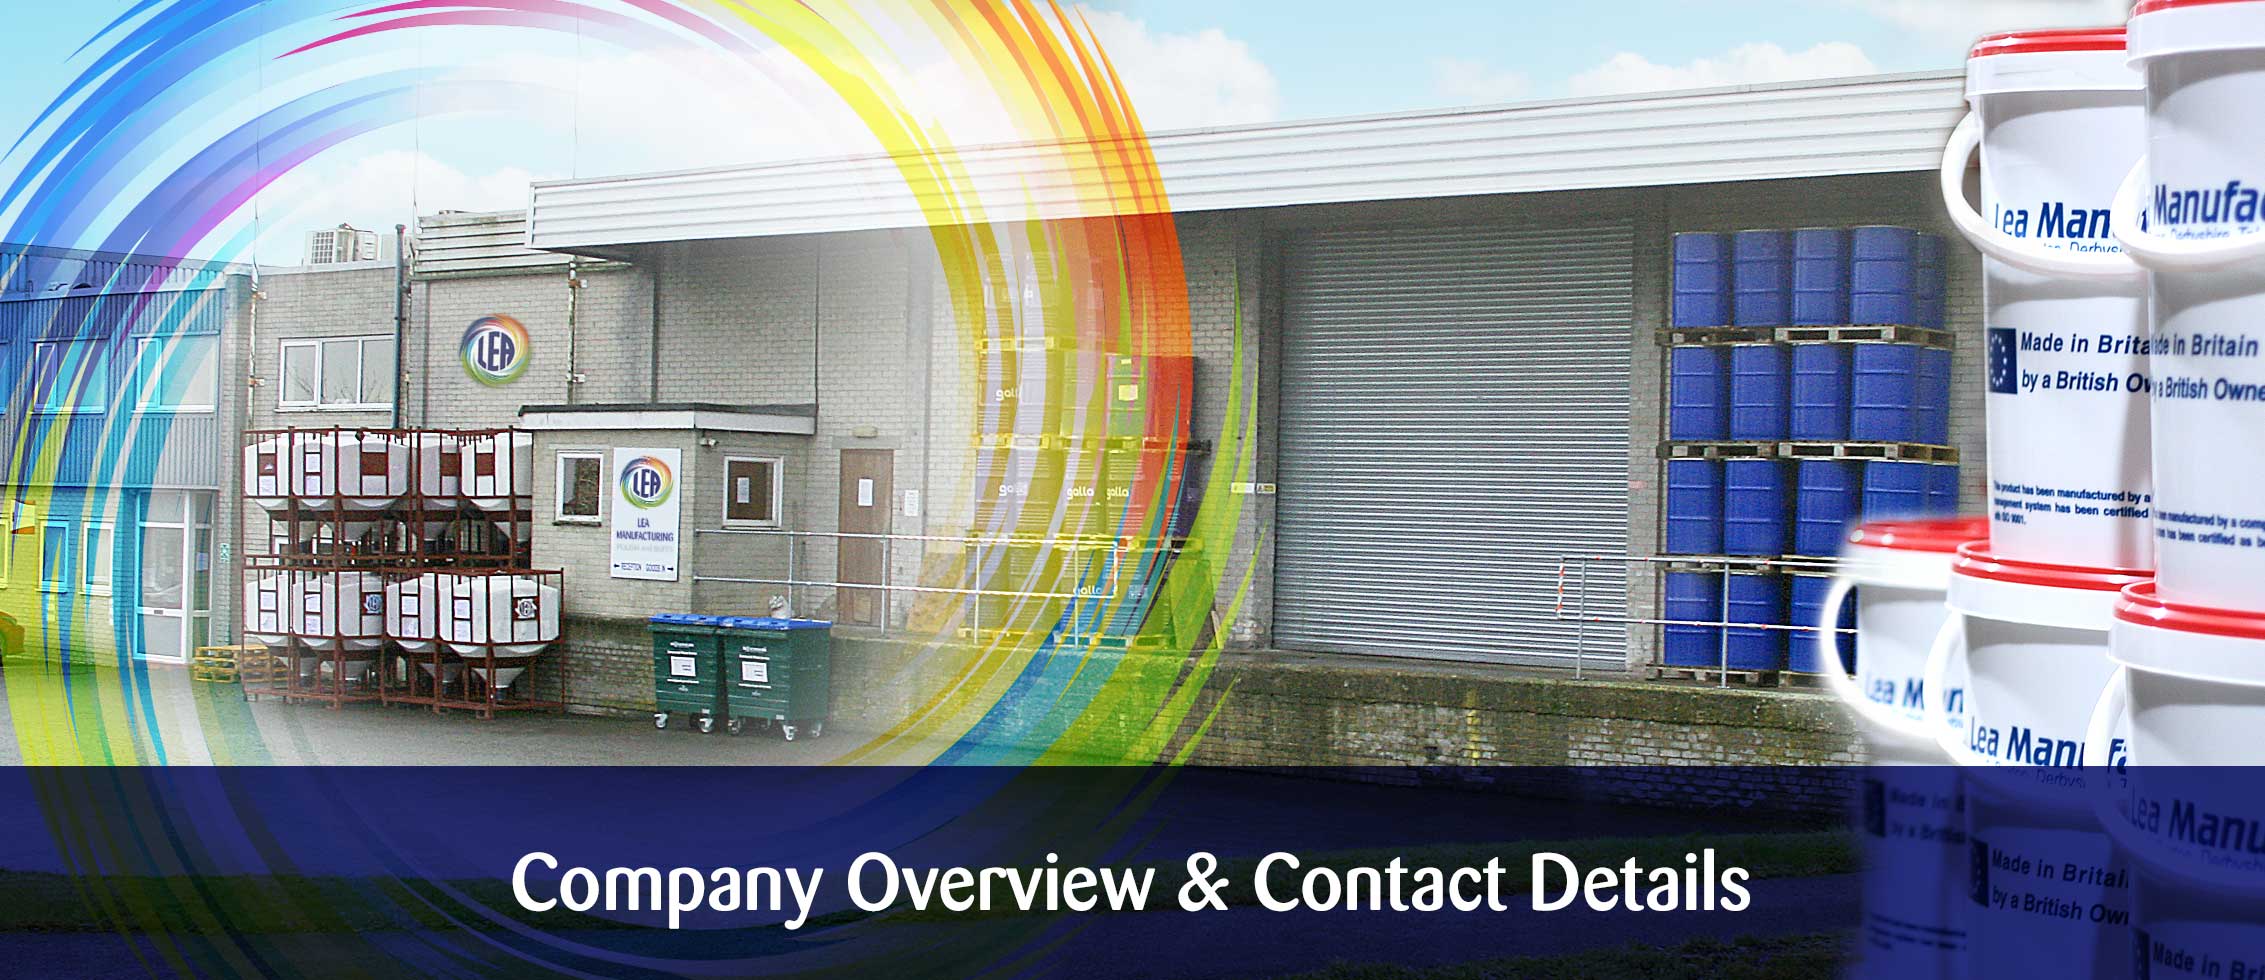 Company Overview and Contact Details